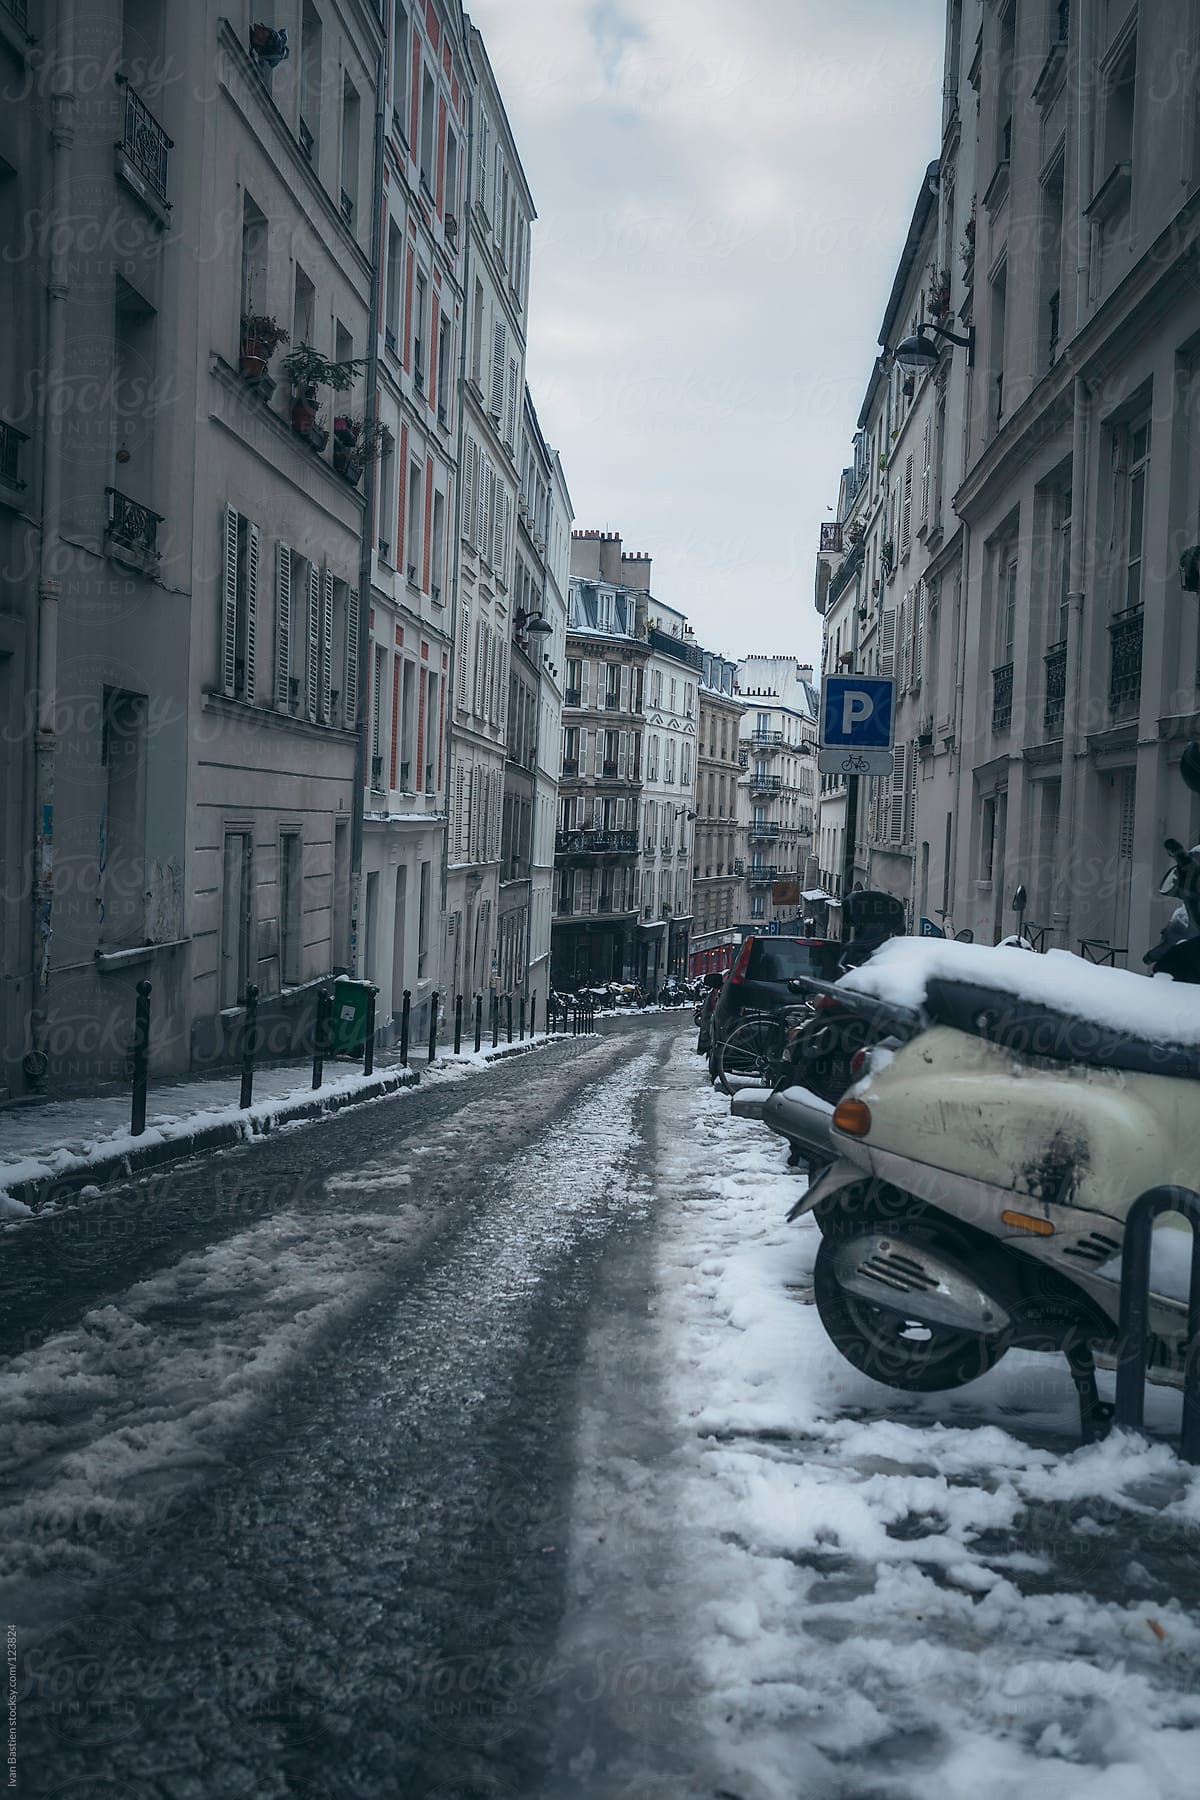 Street with snow on old pavement in Paris, France